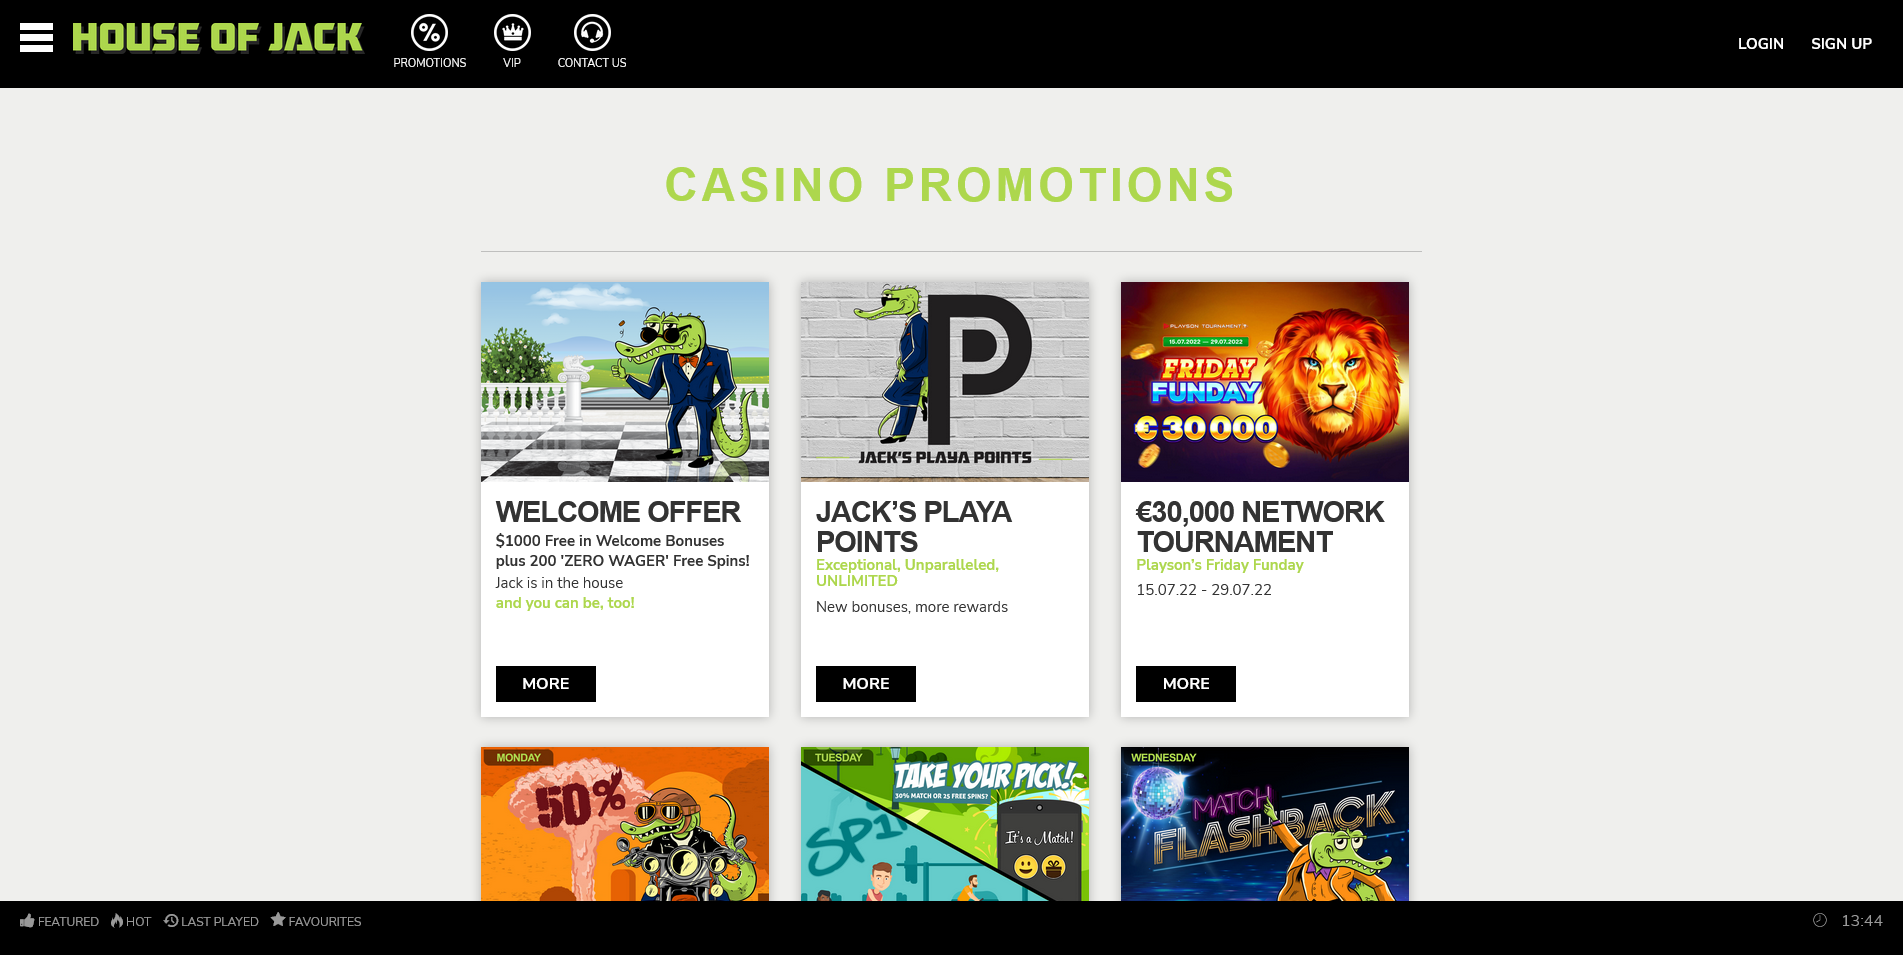 Screenshot of the House of Jack Casino promotions page